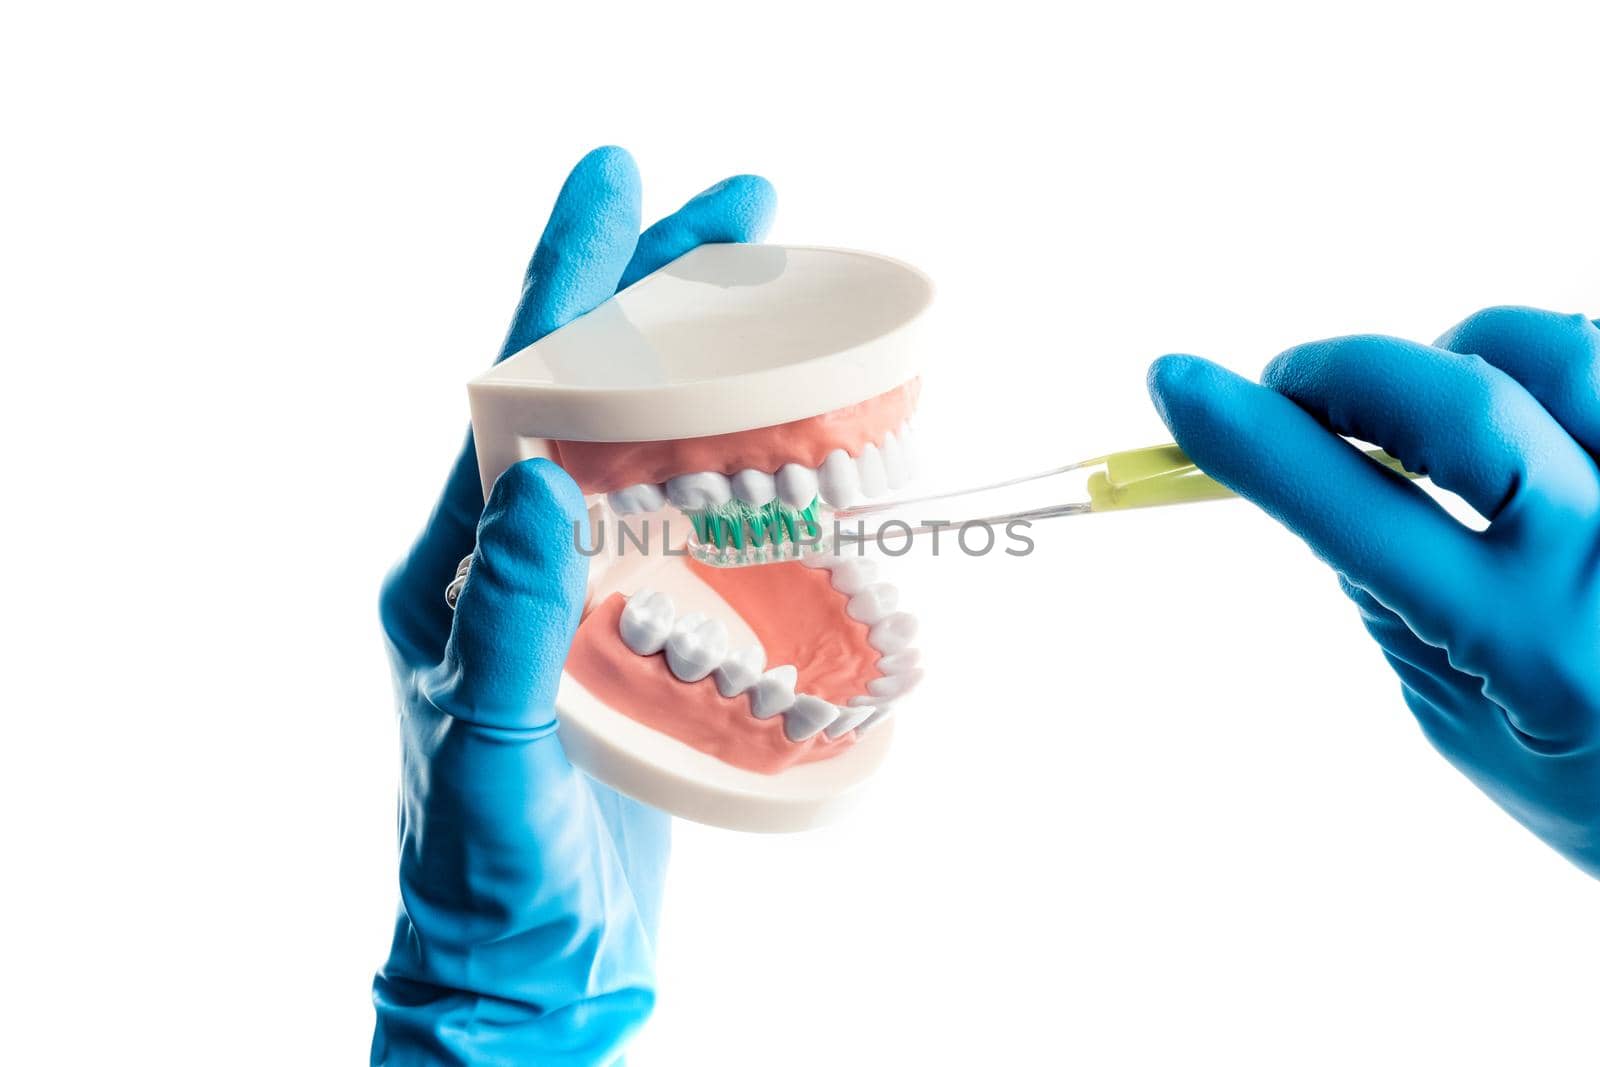 Hands in blue gloves brushing teeth model isolated on white background